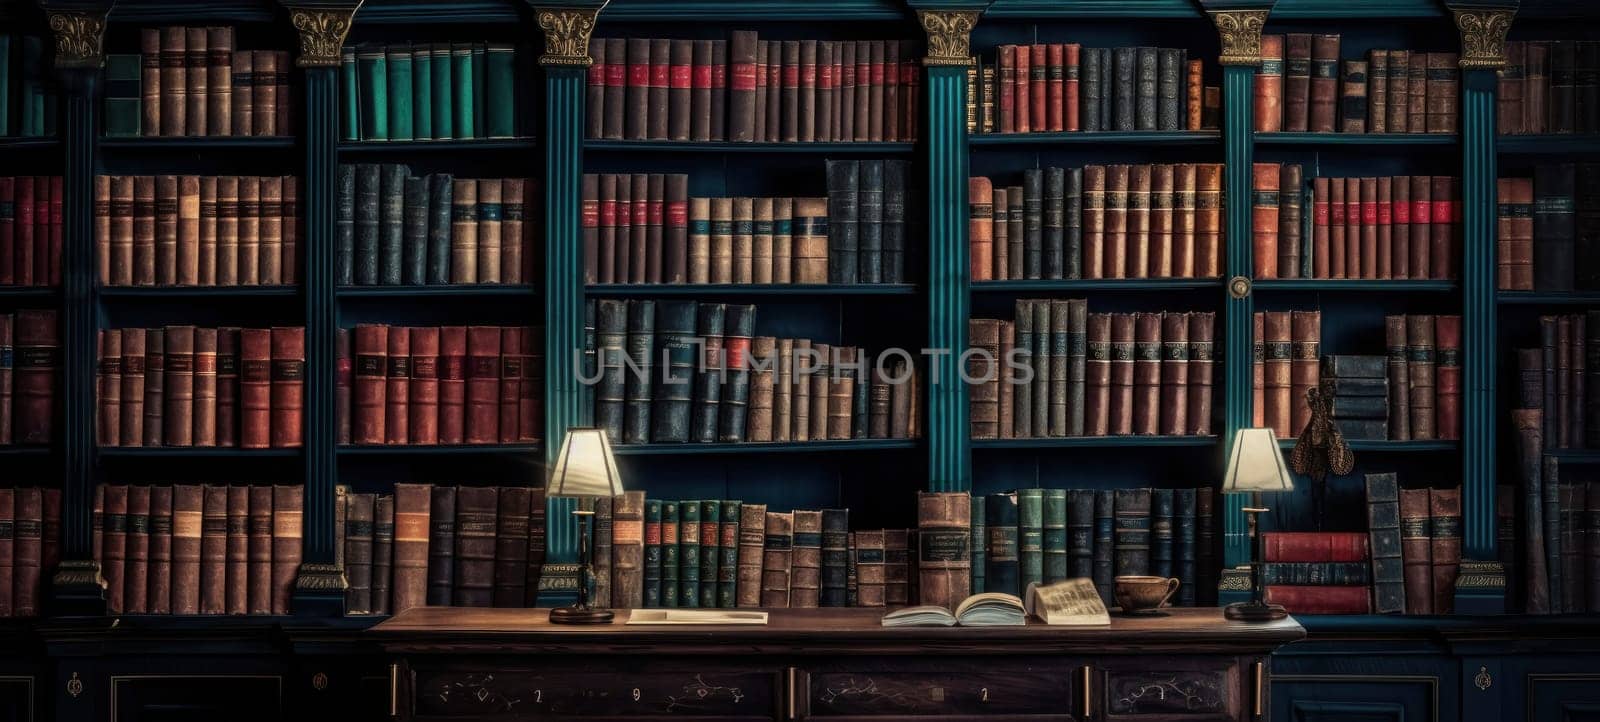 An extensive collection of various books organized neatly on wooden shelves in a private library.